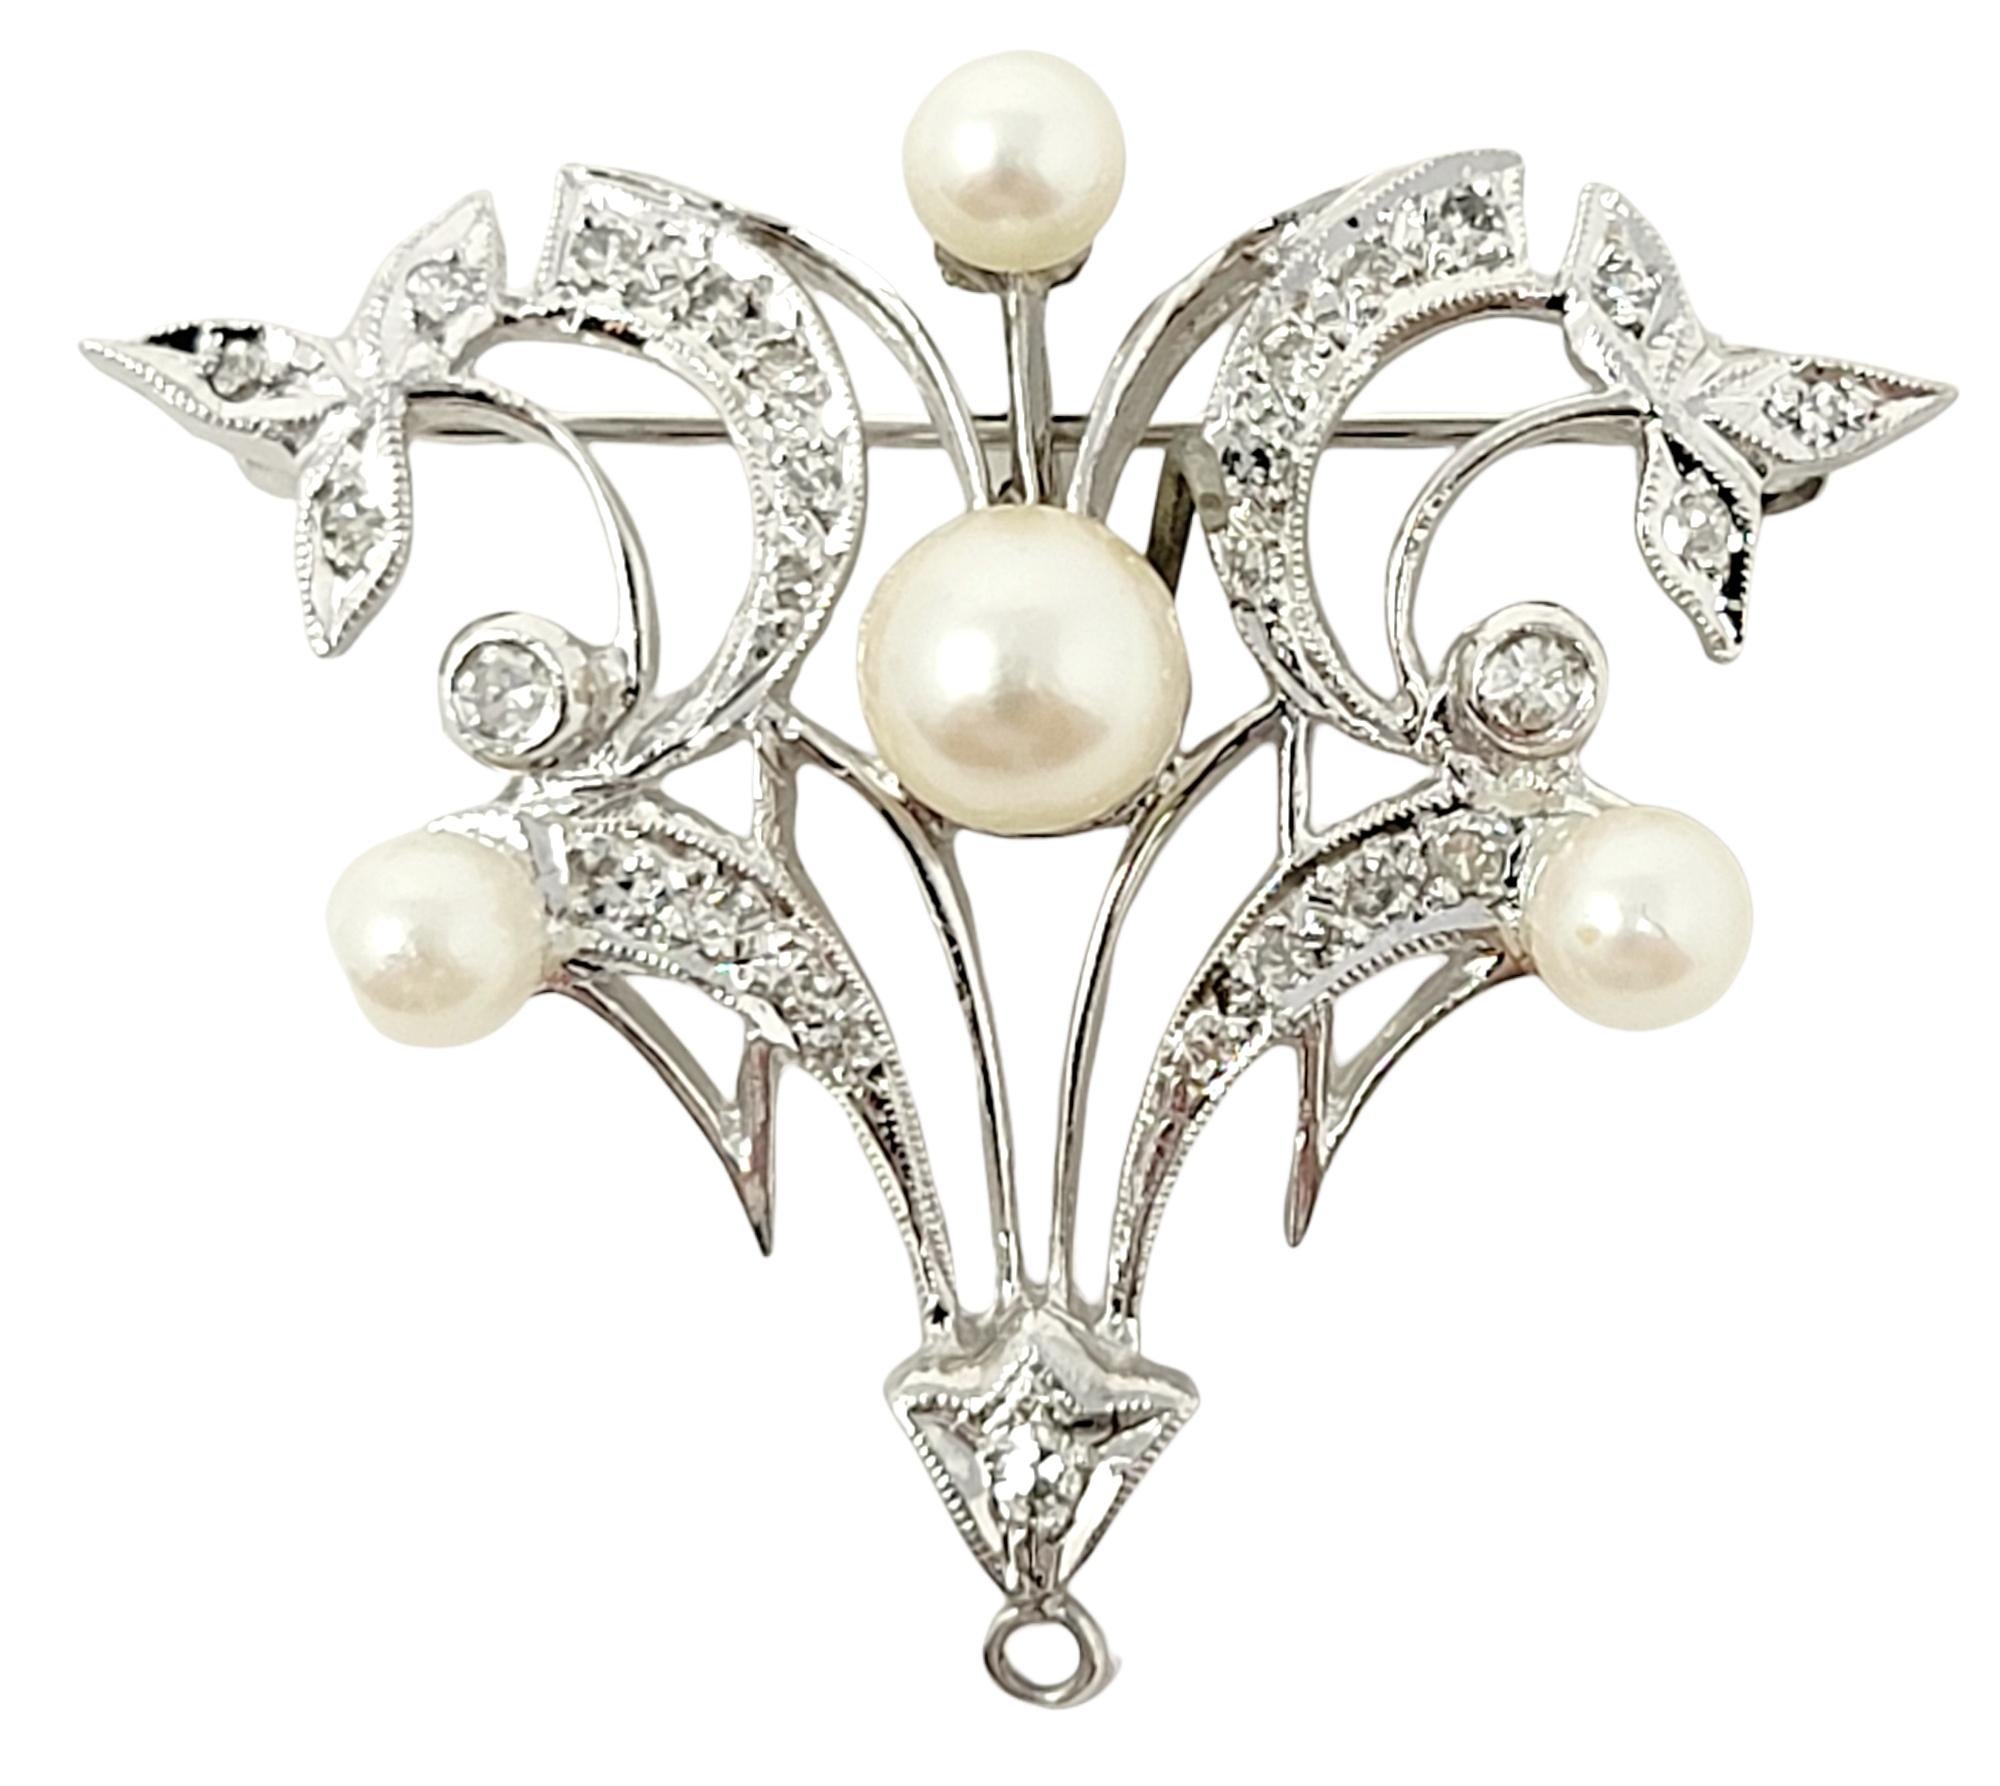 Lovely vintage diamond and pearl brooch / enhancer with delicate milgrain detailing. 

Metal: 14 White Gold
Pearls: 4
Natural Diamonds: .40 ctw
Diamond cut: Round brilliant
Diamond color: G-H-I
Diamond clarity: VS-SI
Weight: 7.4 grams
Length: